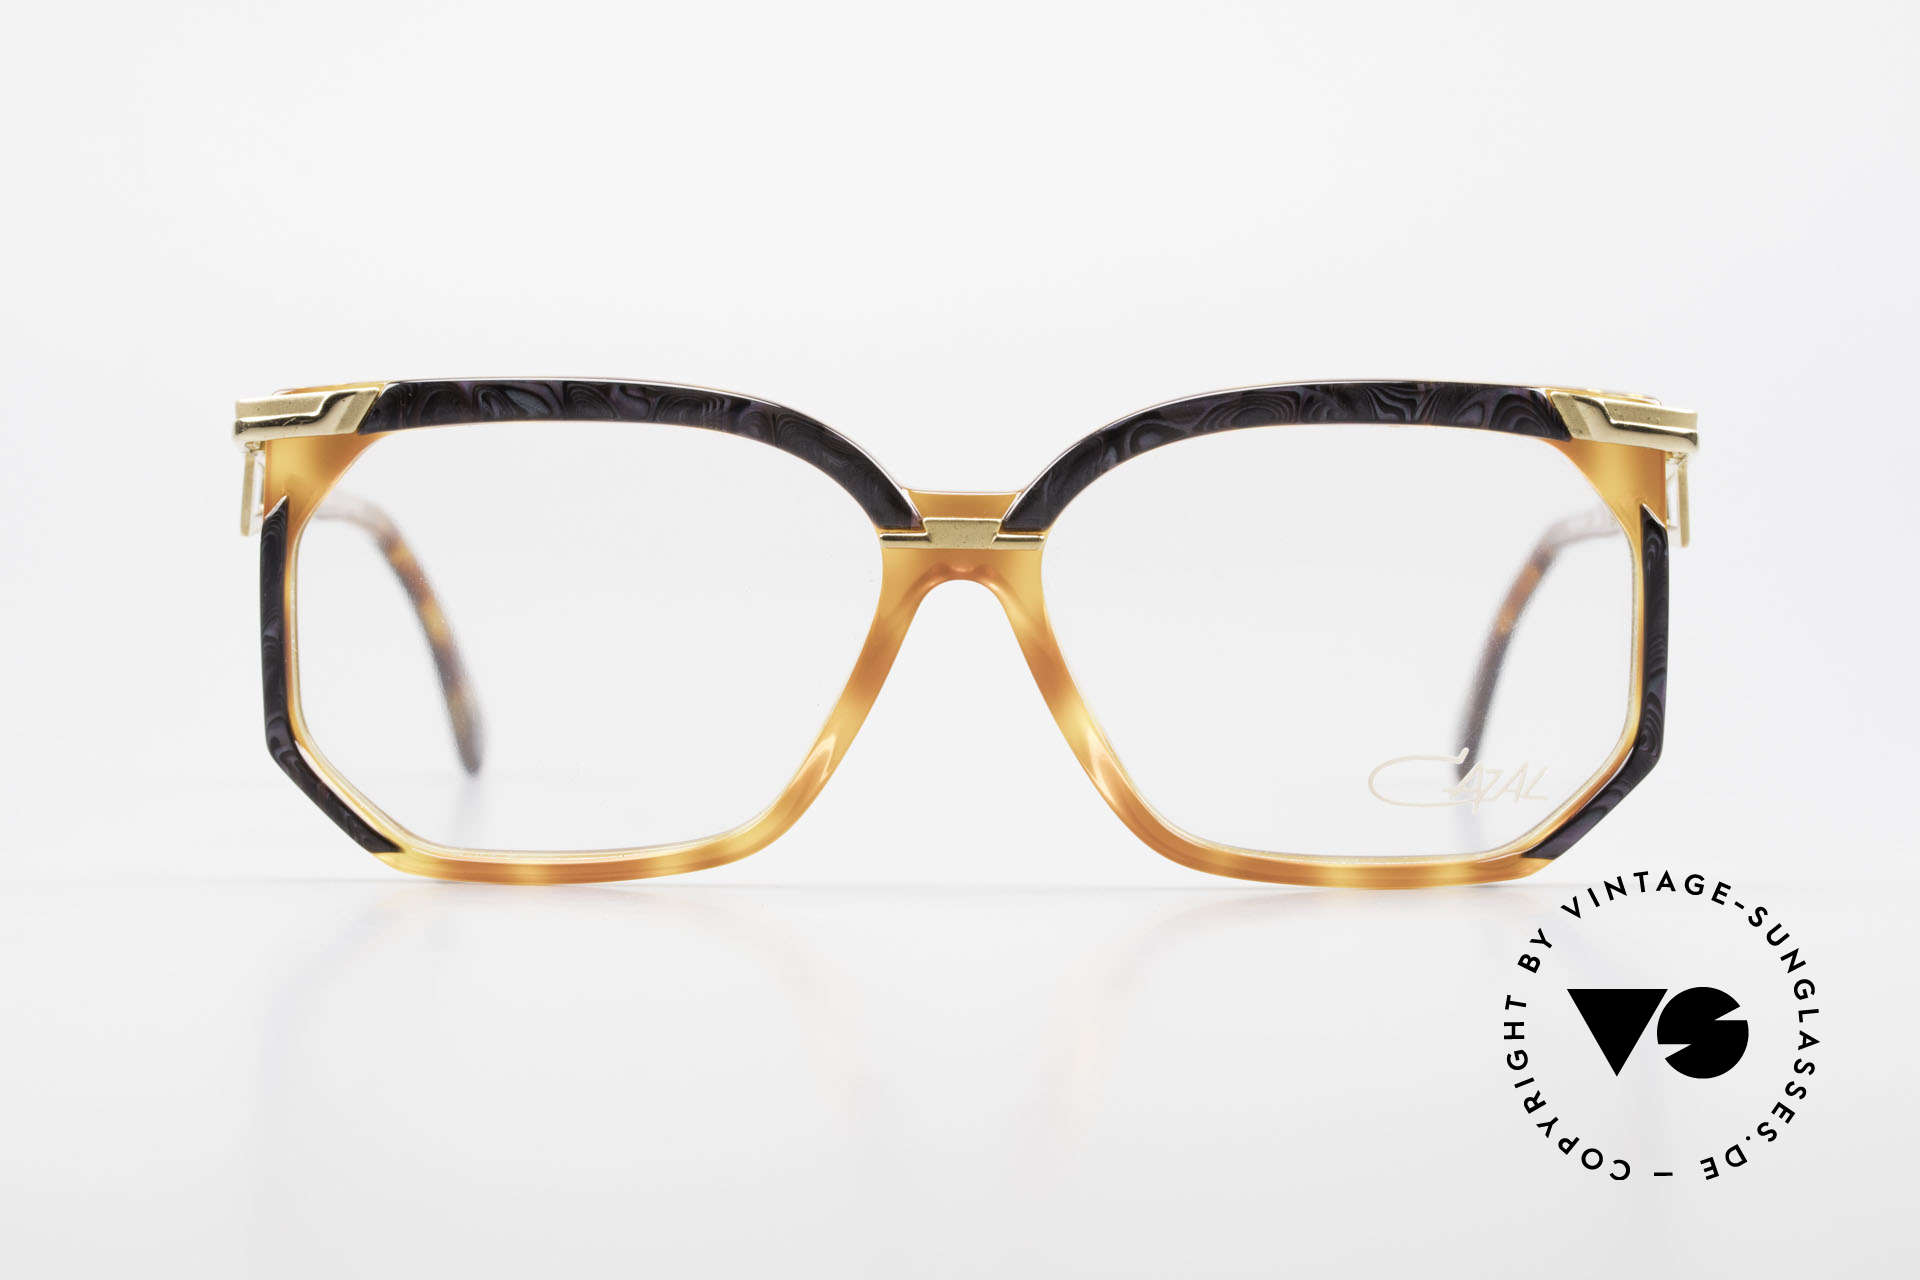 Cazal 333 True Vintage HipHop Frame 90s, distinctive combination of colors, shape & materials, Made for Men and Women